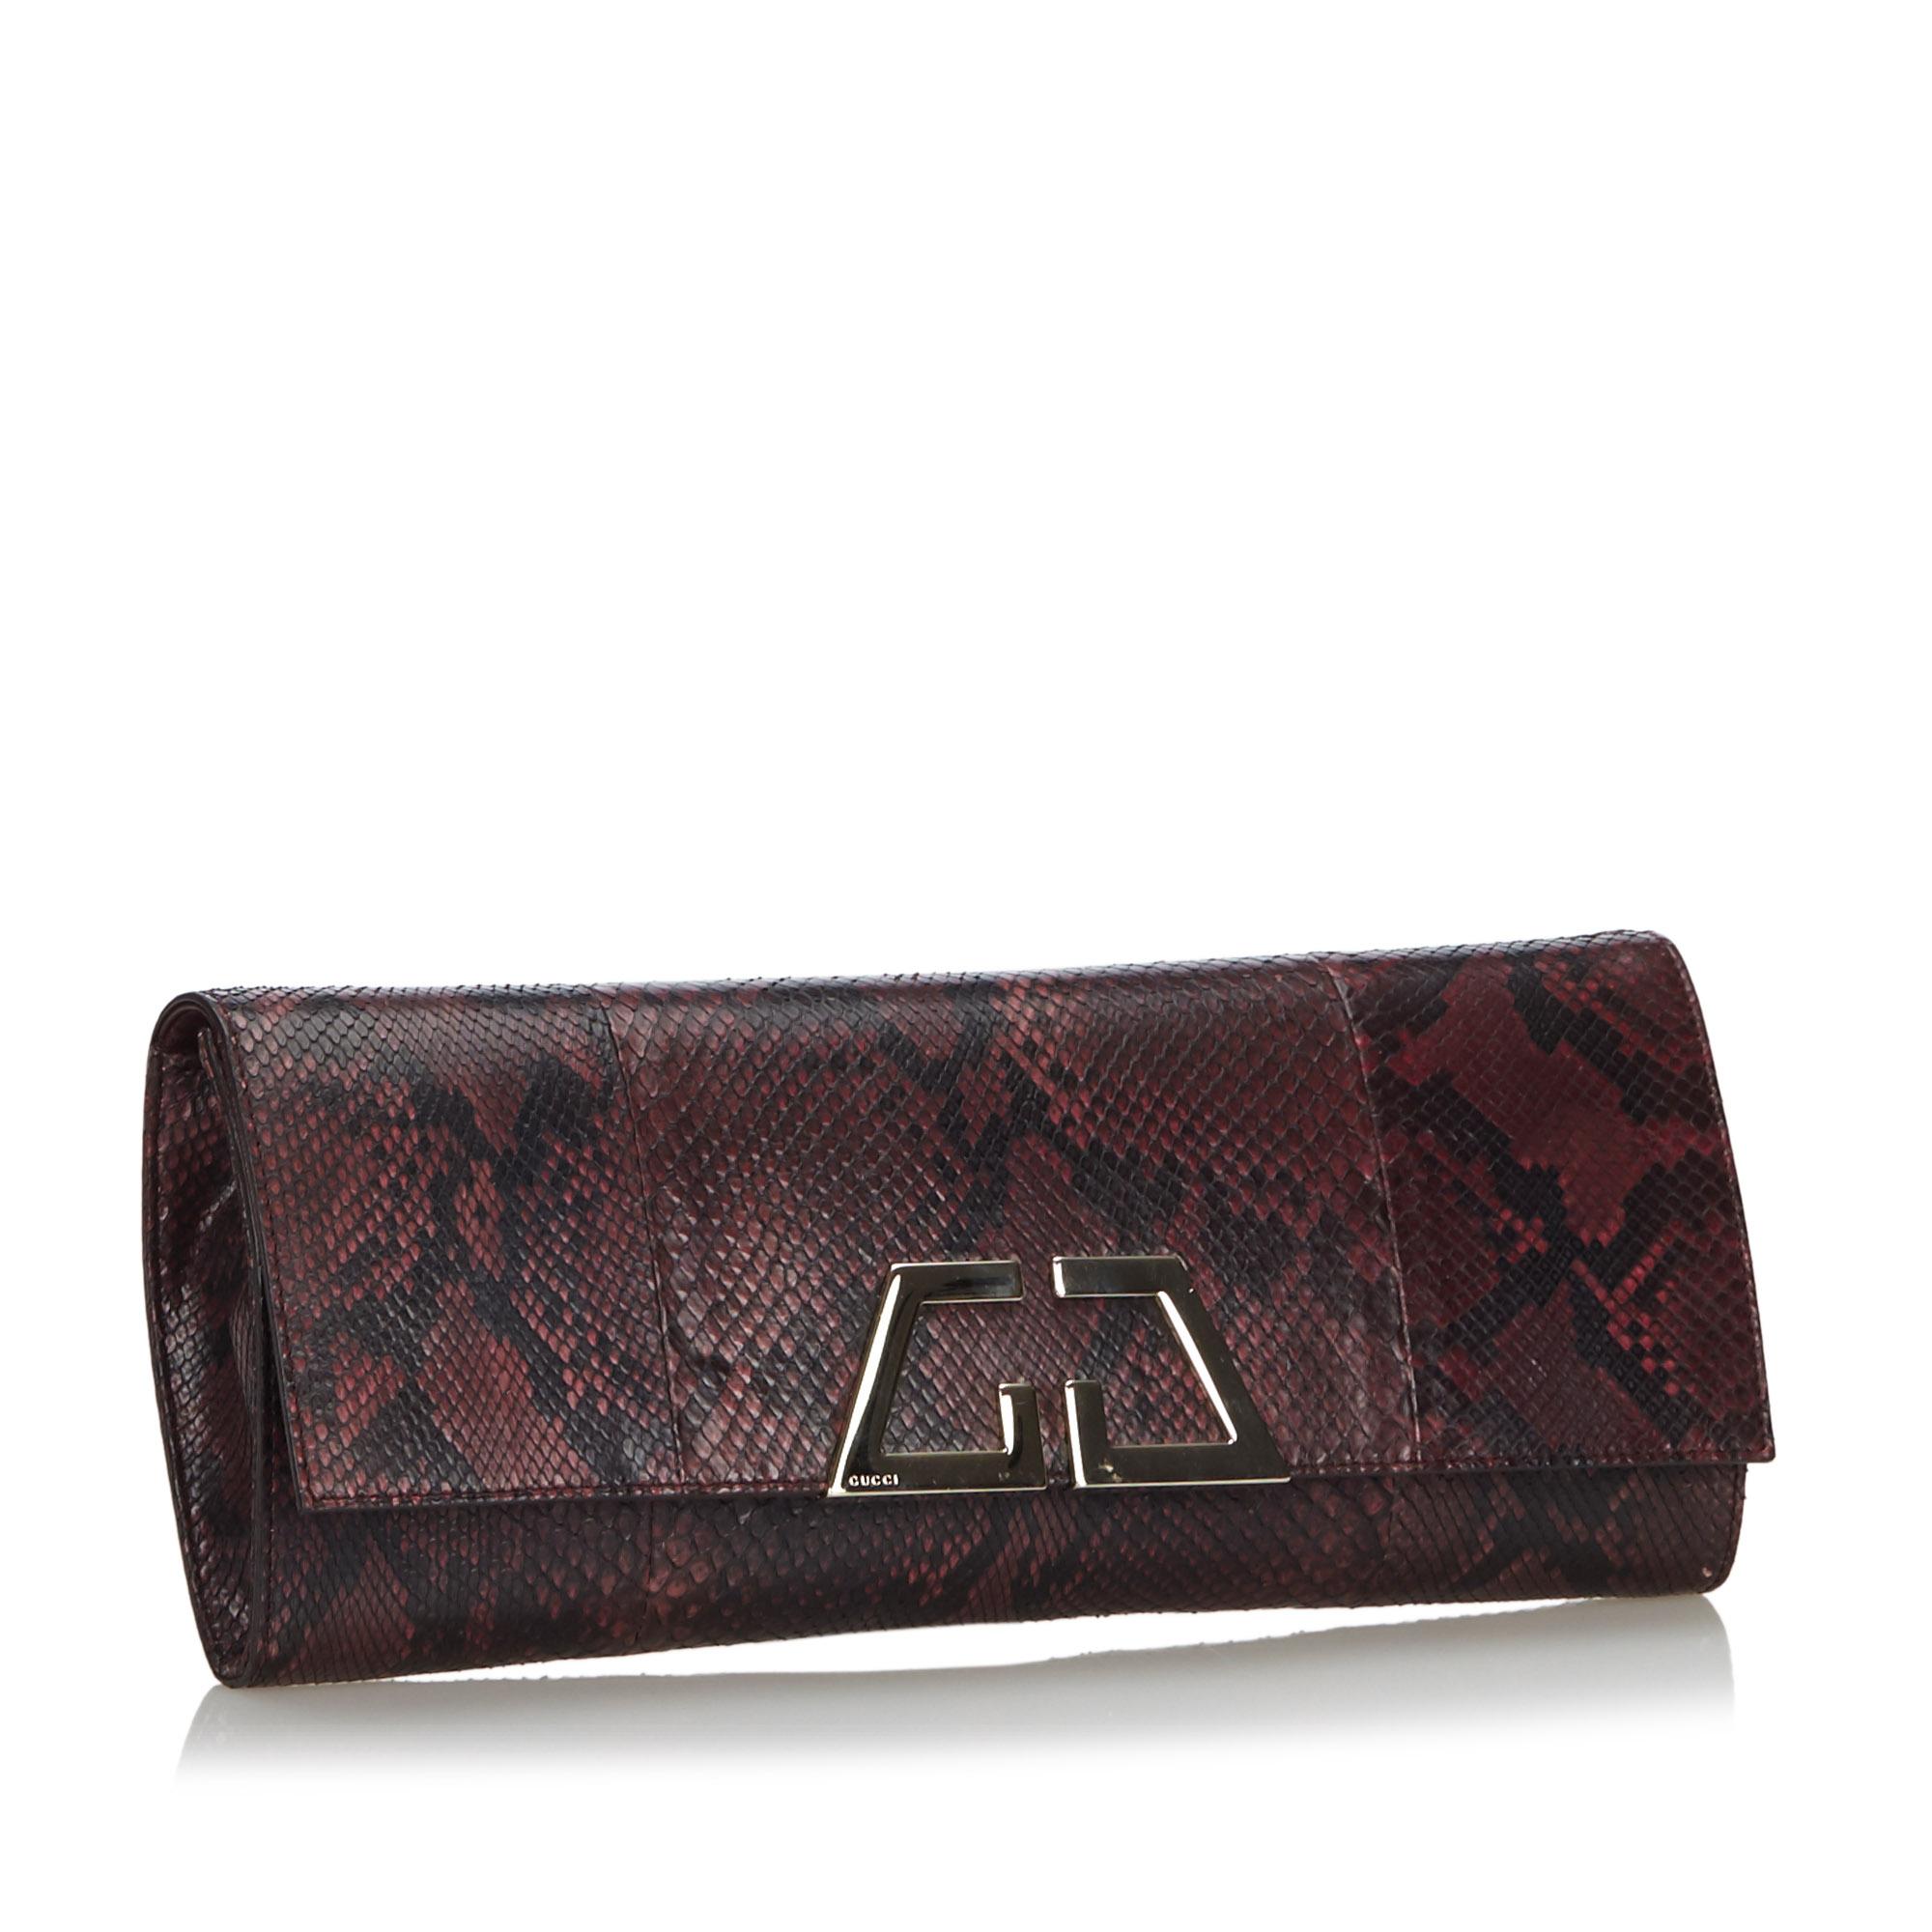 The G Night Clutch bag features a python leather body, a front flap with a magnetic closure, and an interior slip pocket. It carries as AB condition rating.

Inclusions: 
Dust Bag

Dimensions:
Length: 14.00 cm
Width: 32.00 cm
Depth: 2.00